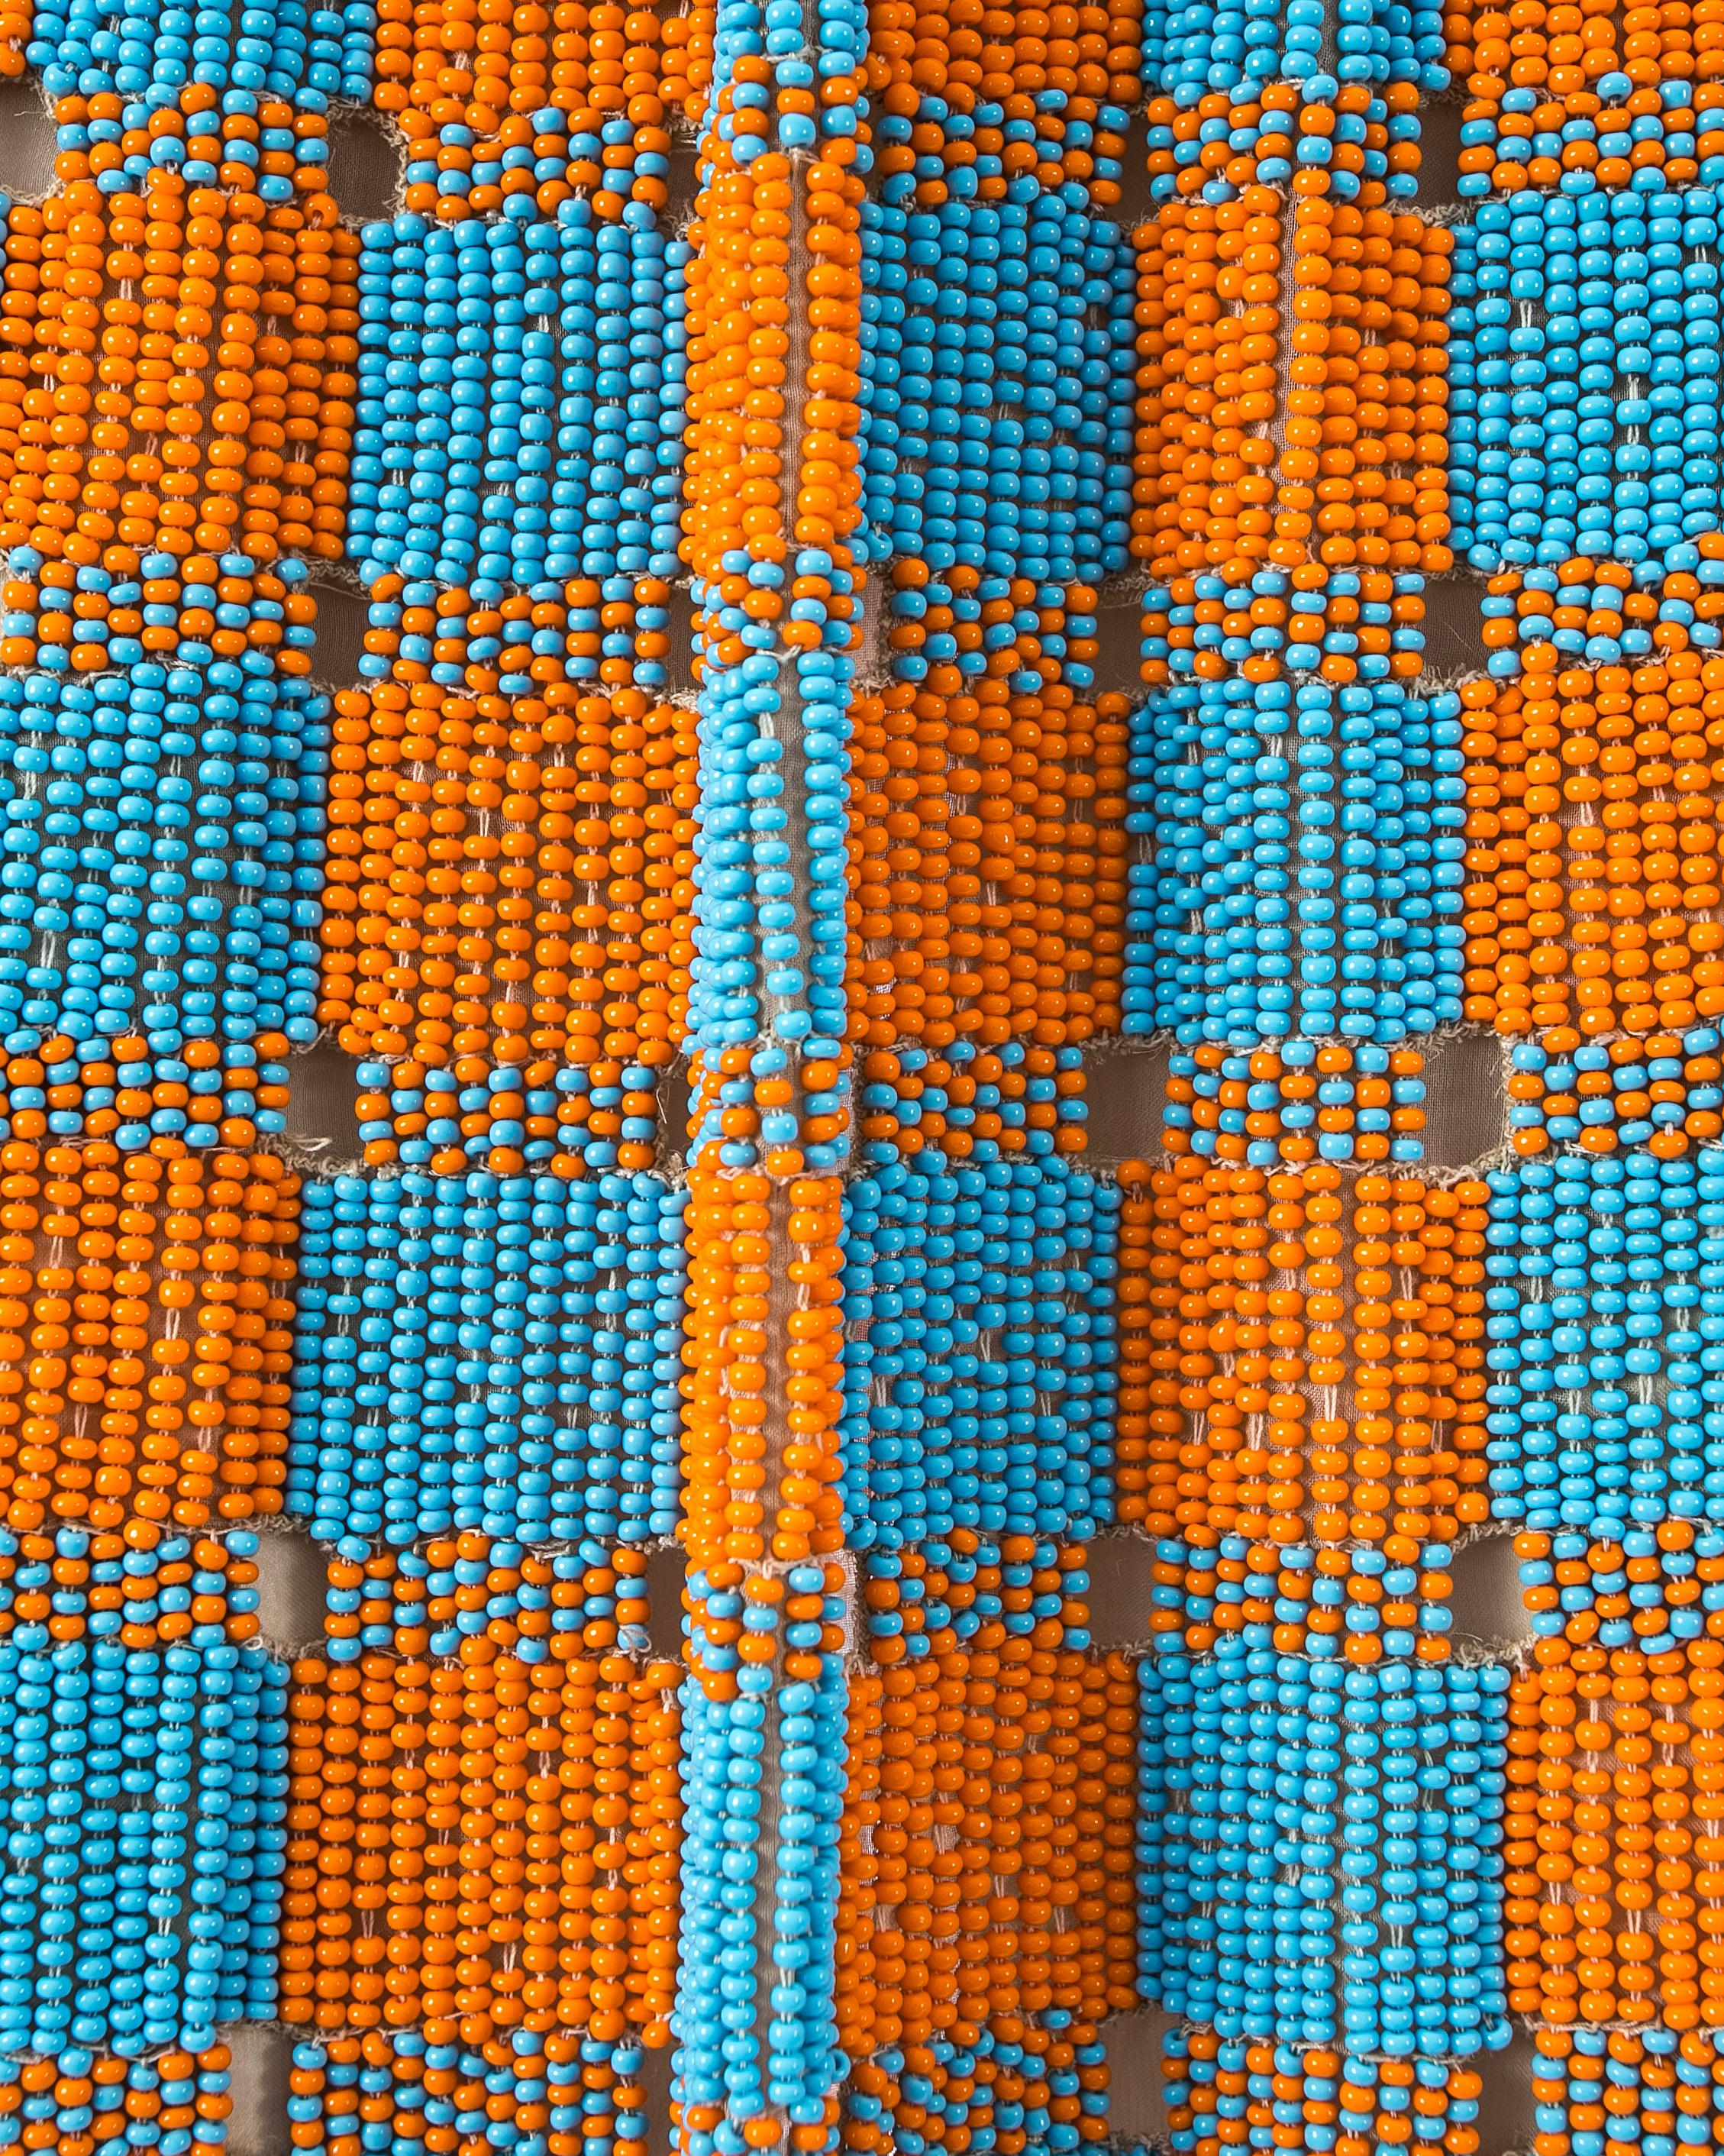 Beaded orange and blue checkered skirt with silk chiffon lining, leather elastic waistband and green beaded fringed trim.

Spring-Summer 1999